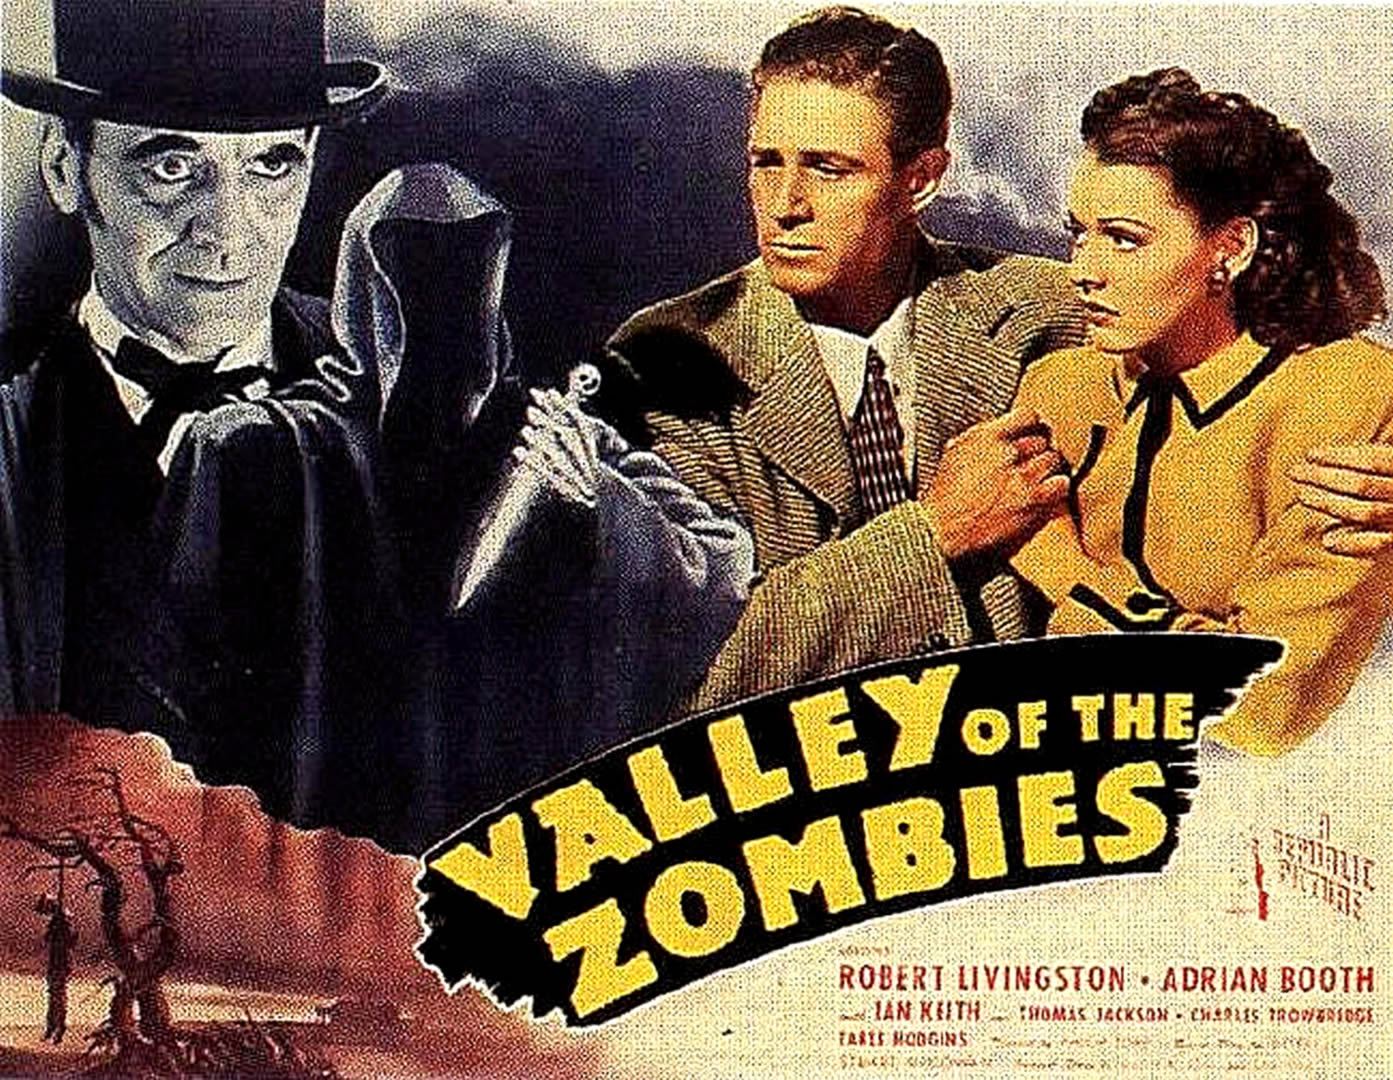 VALLEY-OF-THE-ZOMBIES